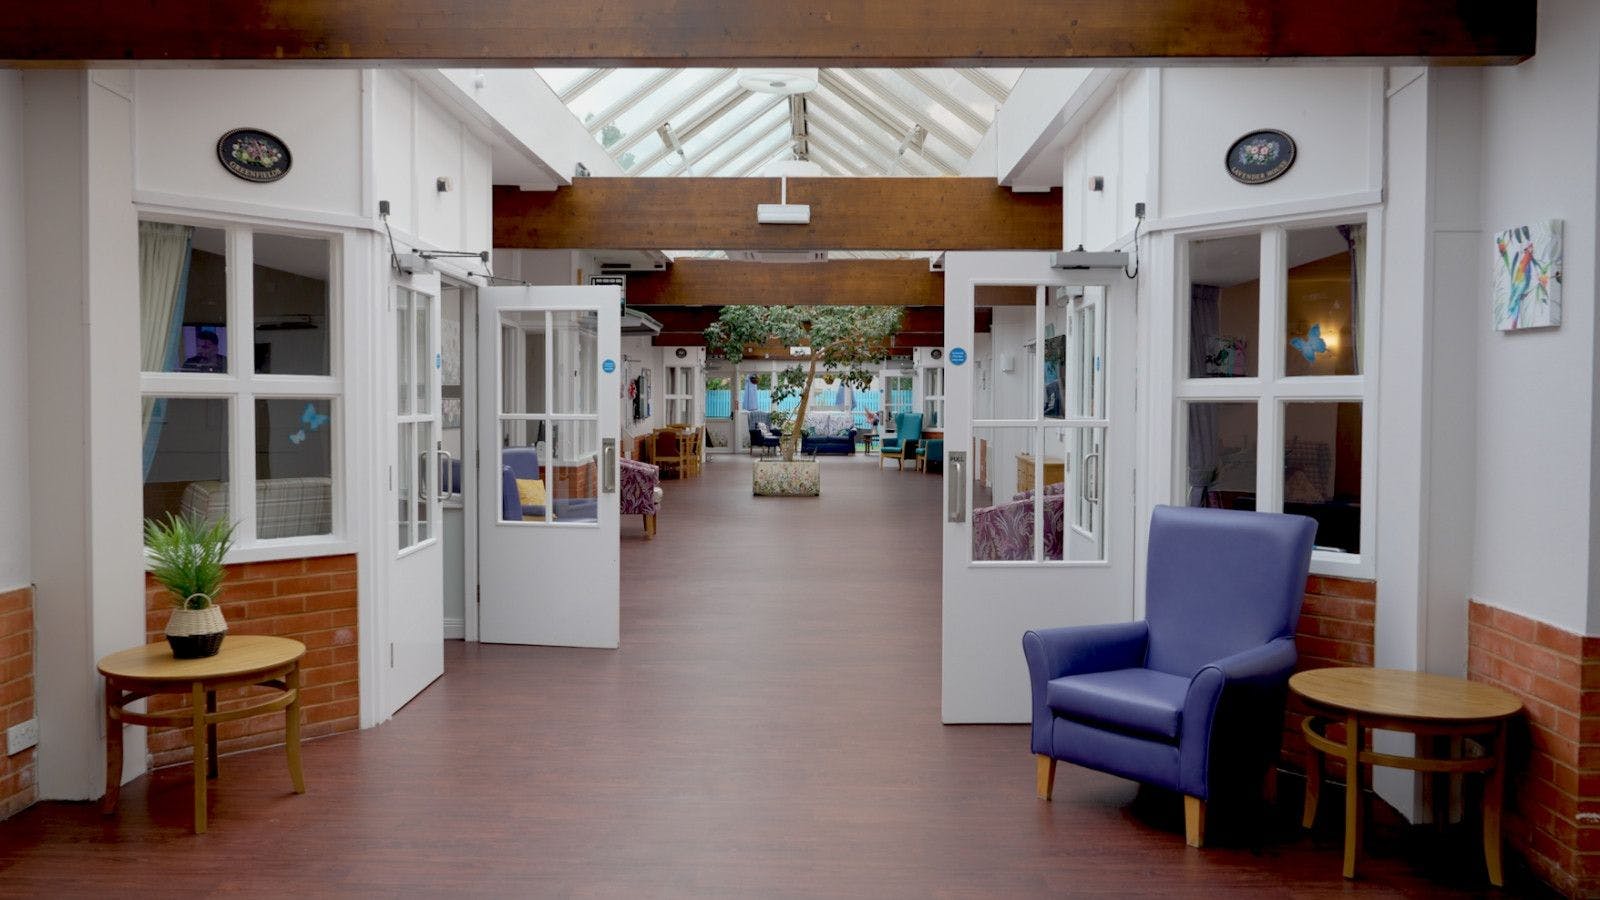 Shaw Healthcare - Homefield House care home 001